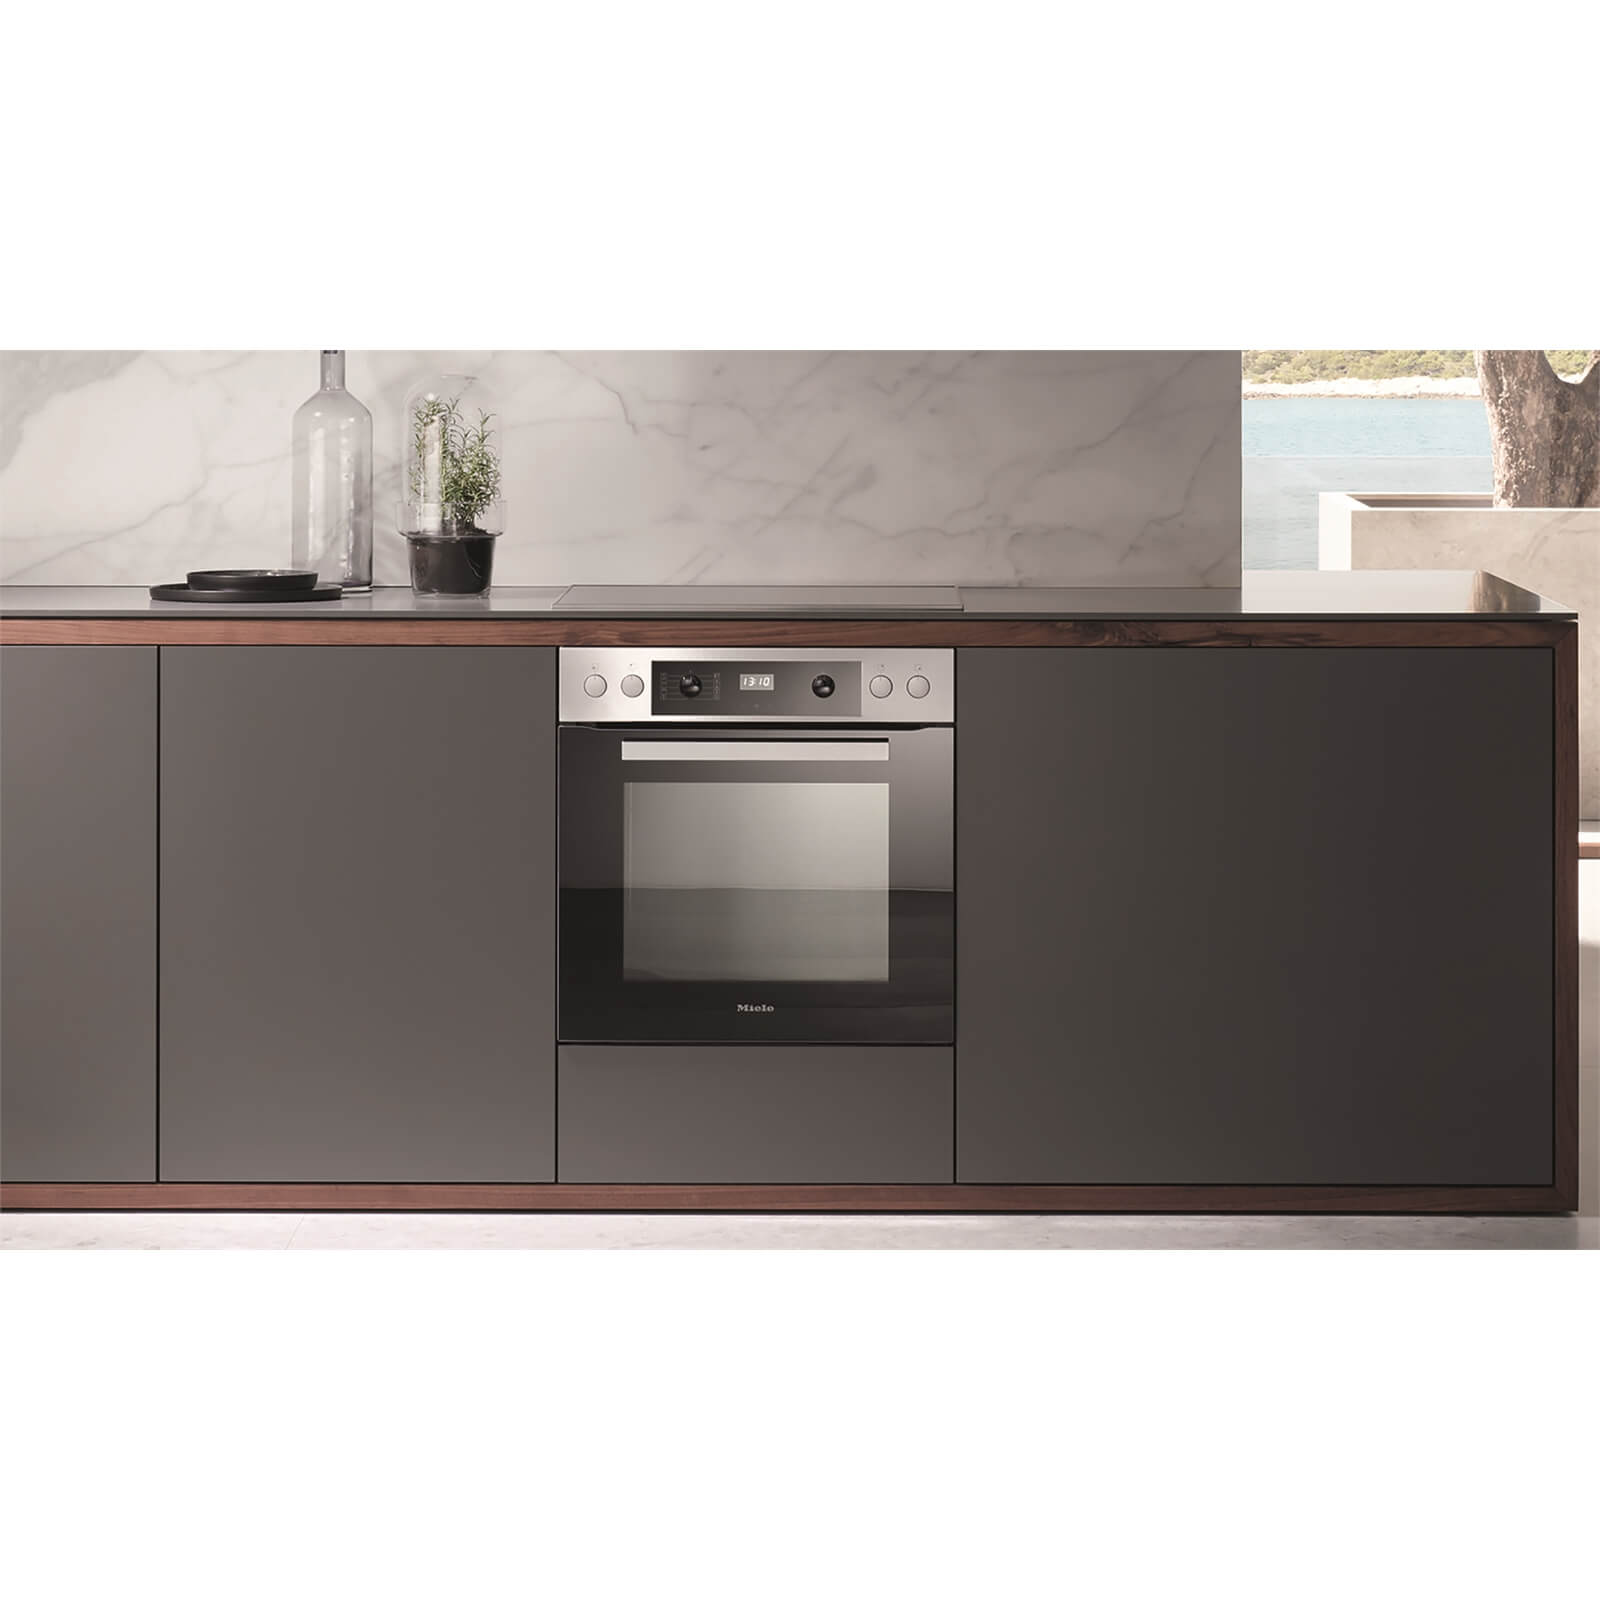 Miele H2265-1B Built-in Oven